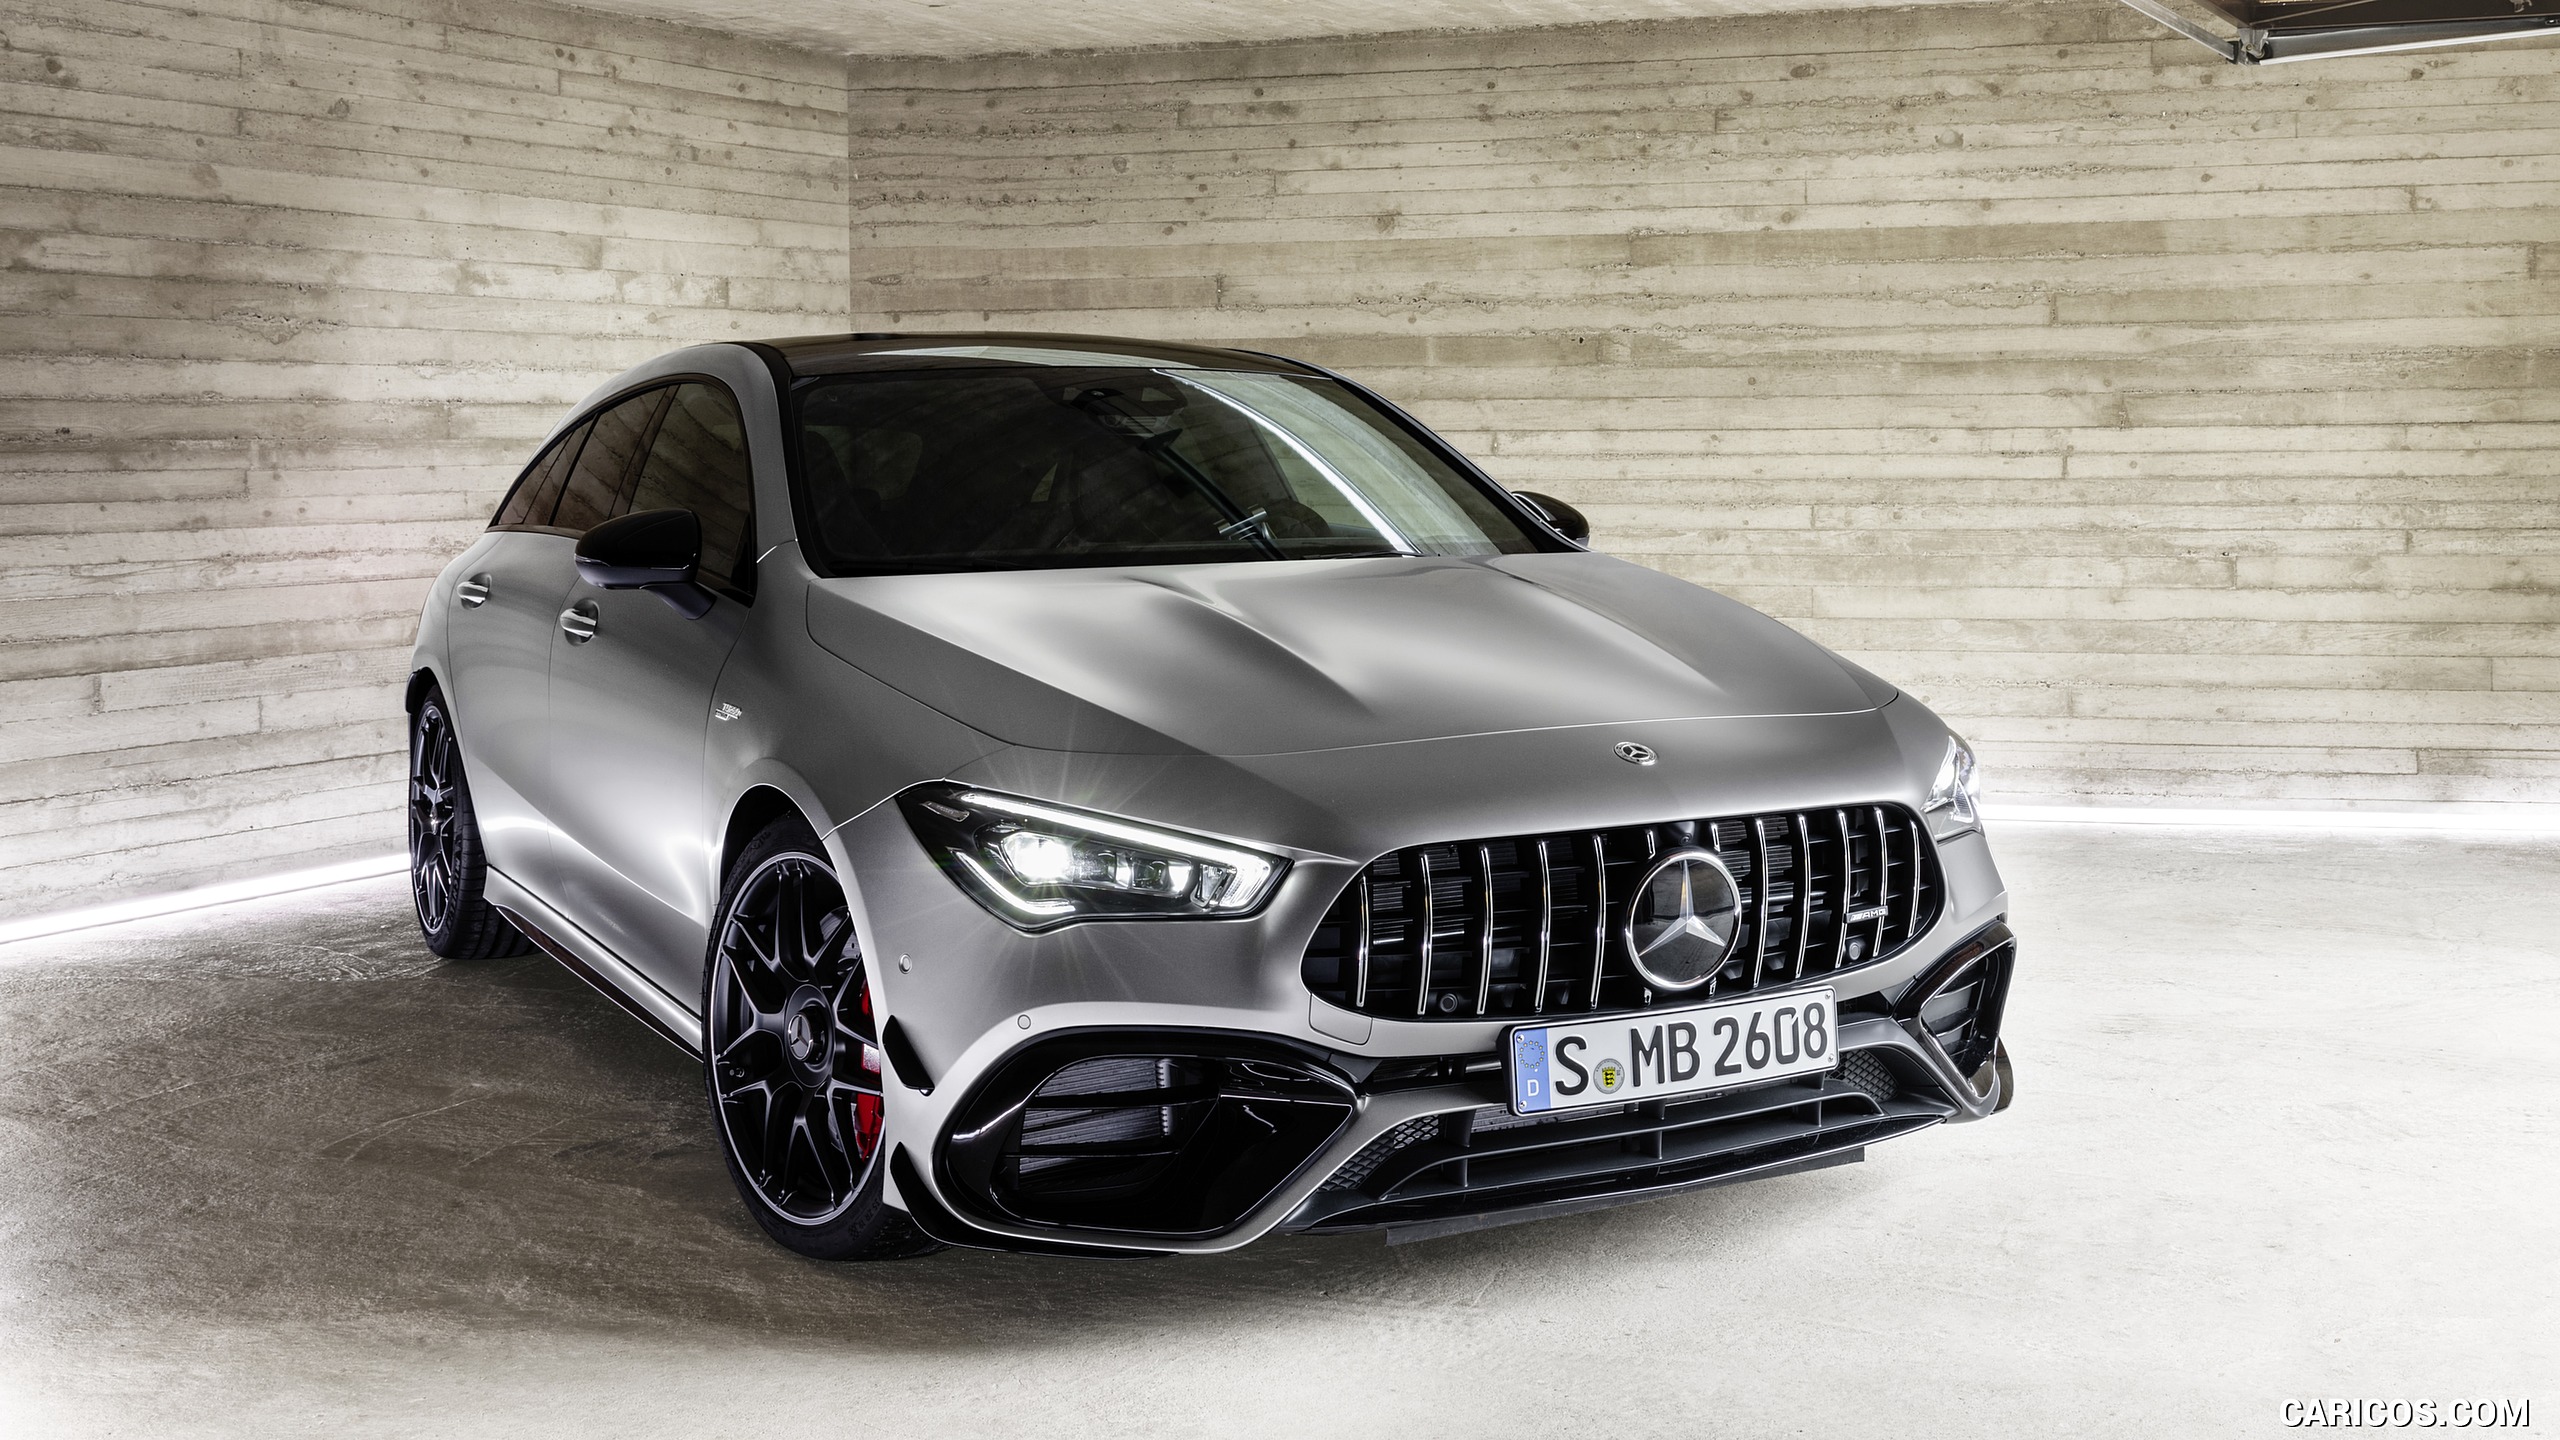 2020 Mercedes-AMG CLA 45 S 4MATIC+ Shooting Brake - Front Three-Quarter, #25 of 35